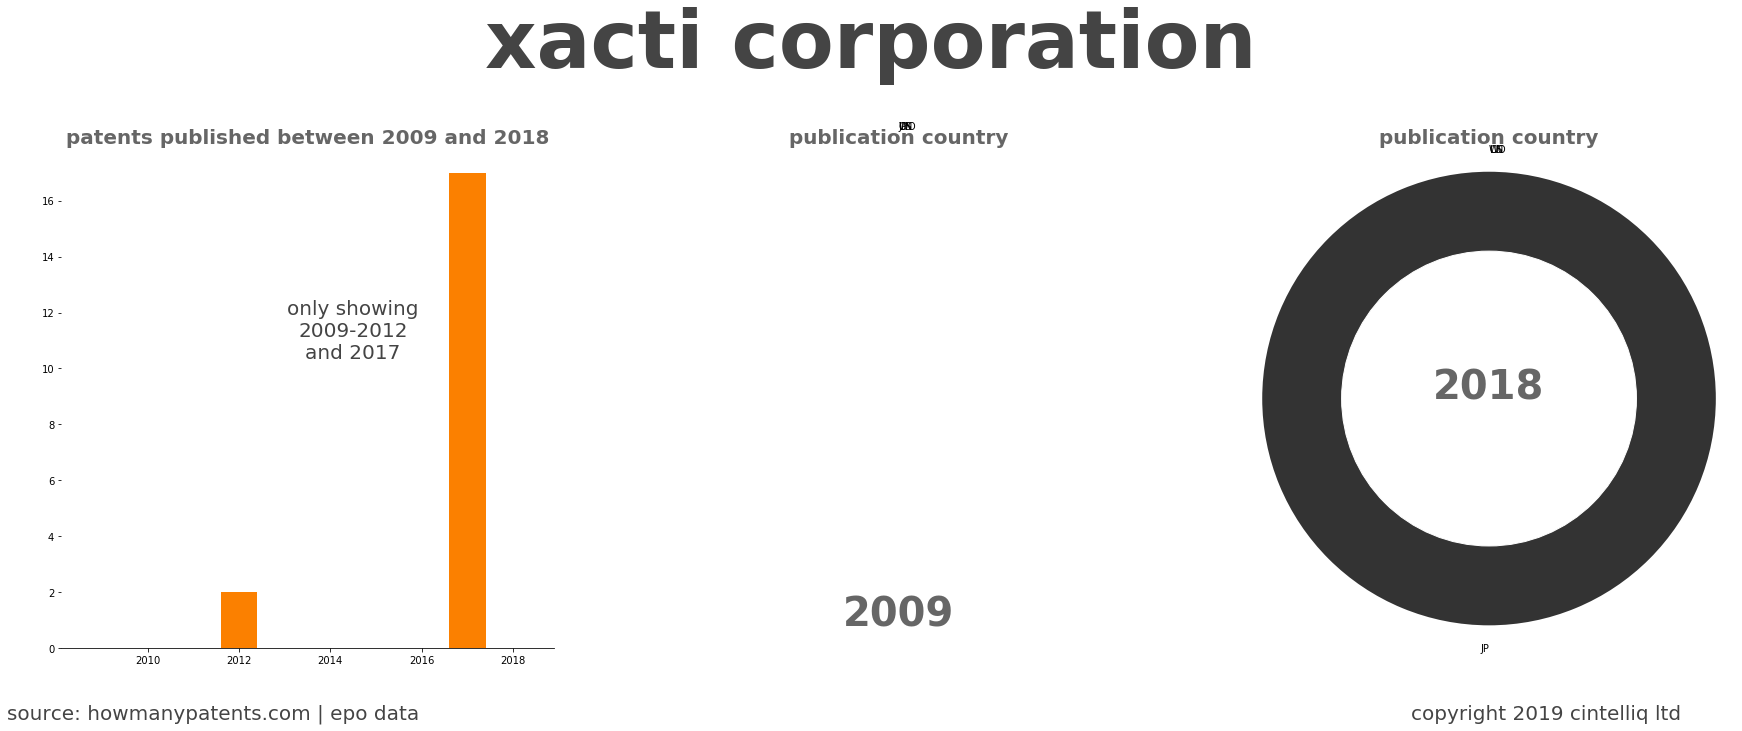 summary of patents for Xacti Corporation